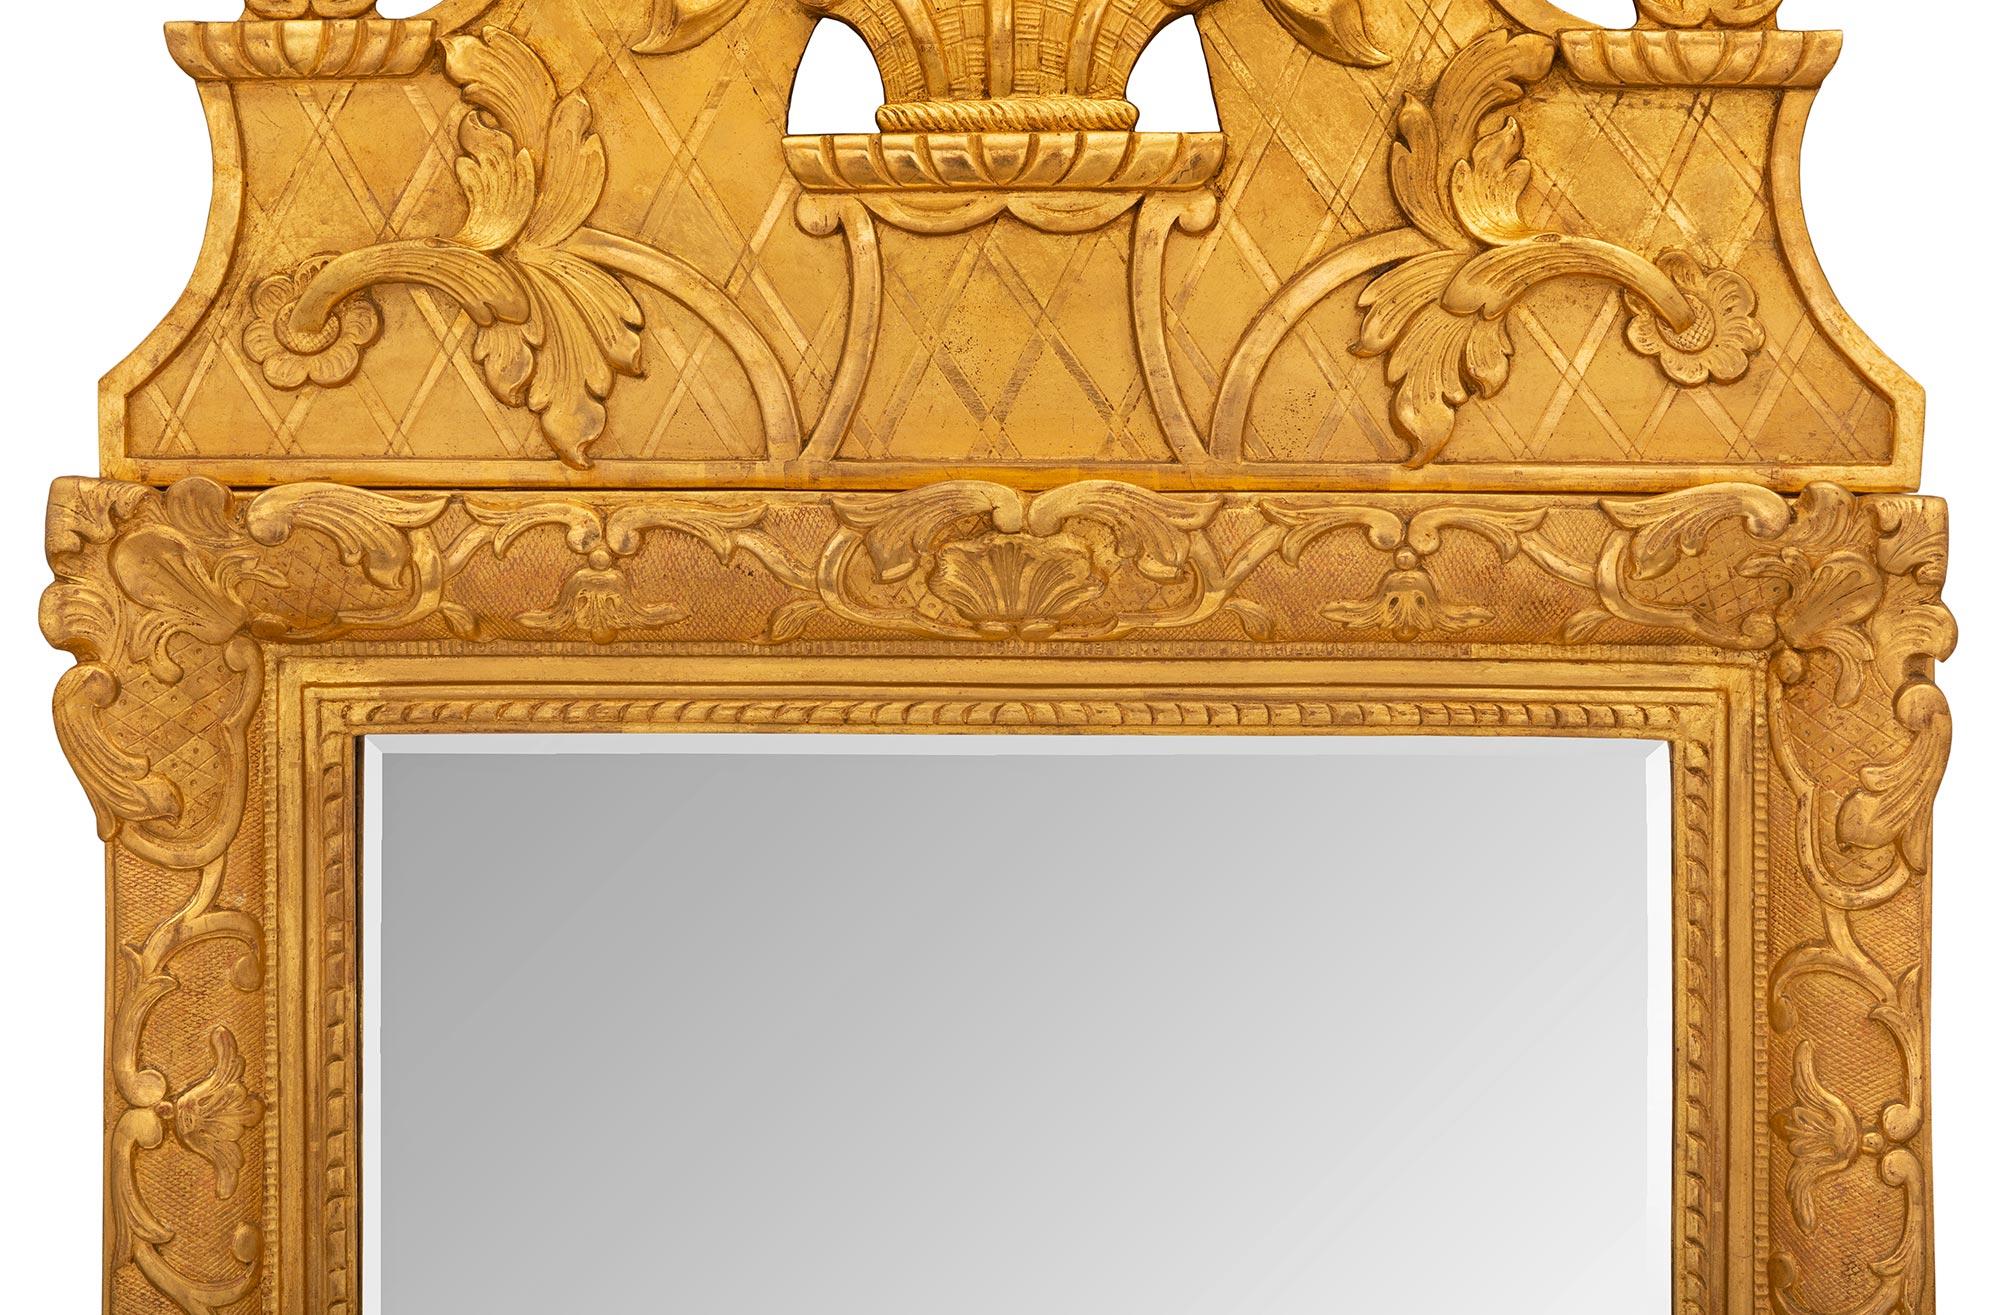 French 18th Century Regence Period Giltwood Mirror For Sale 2